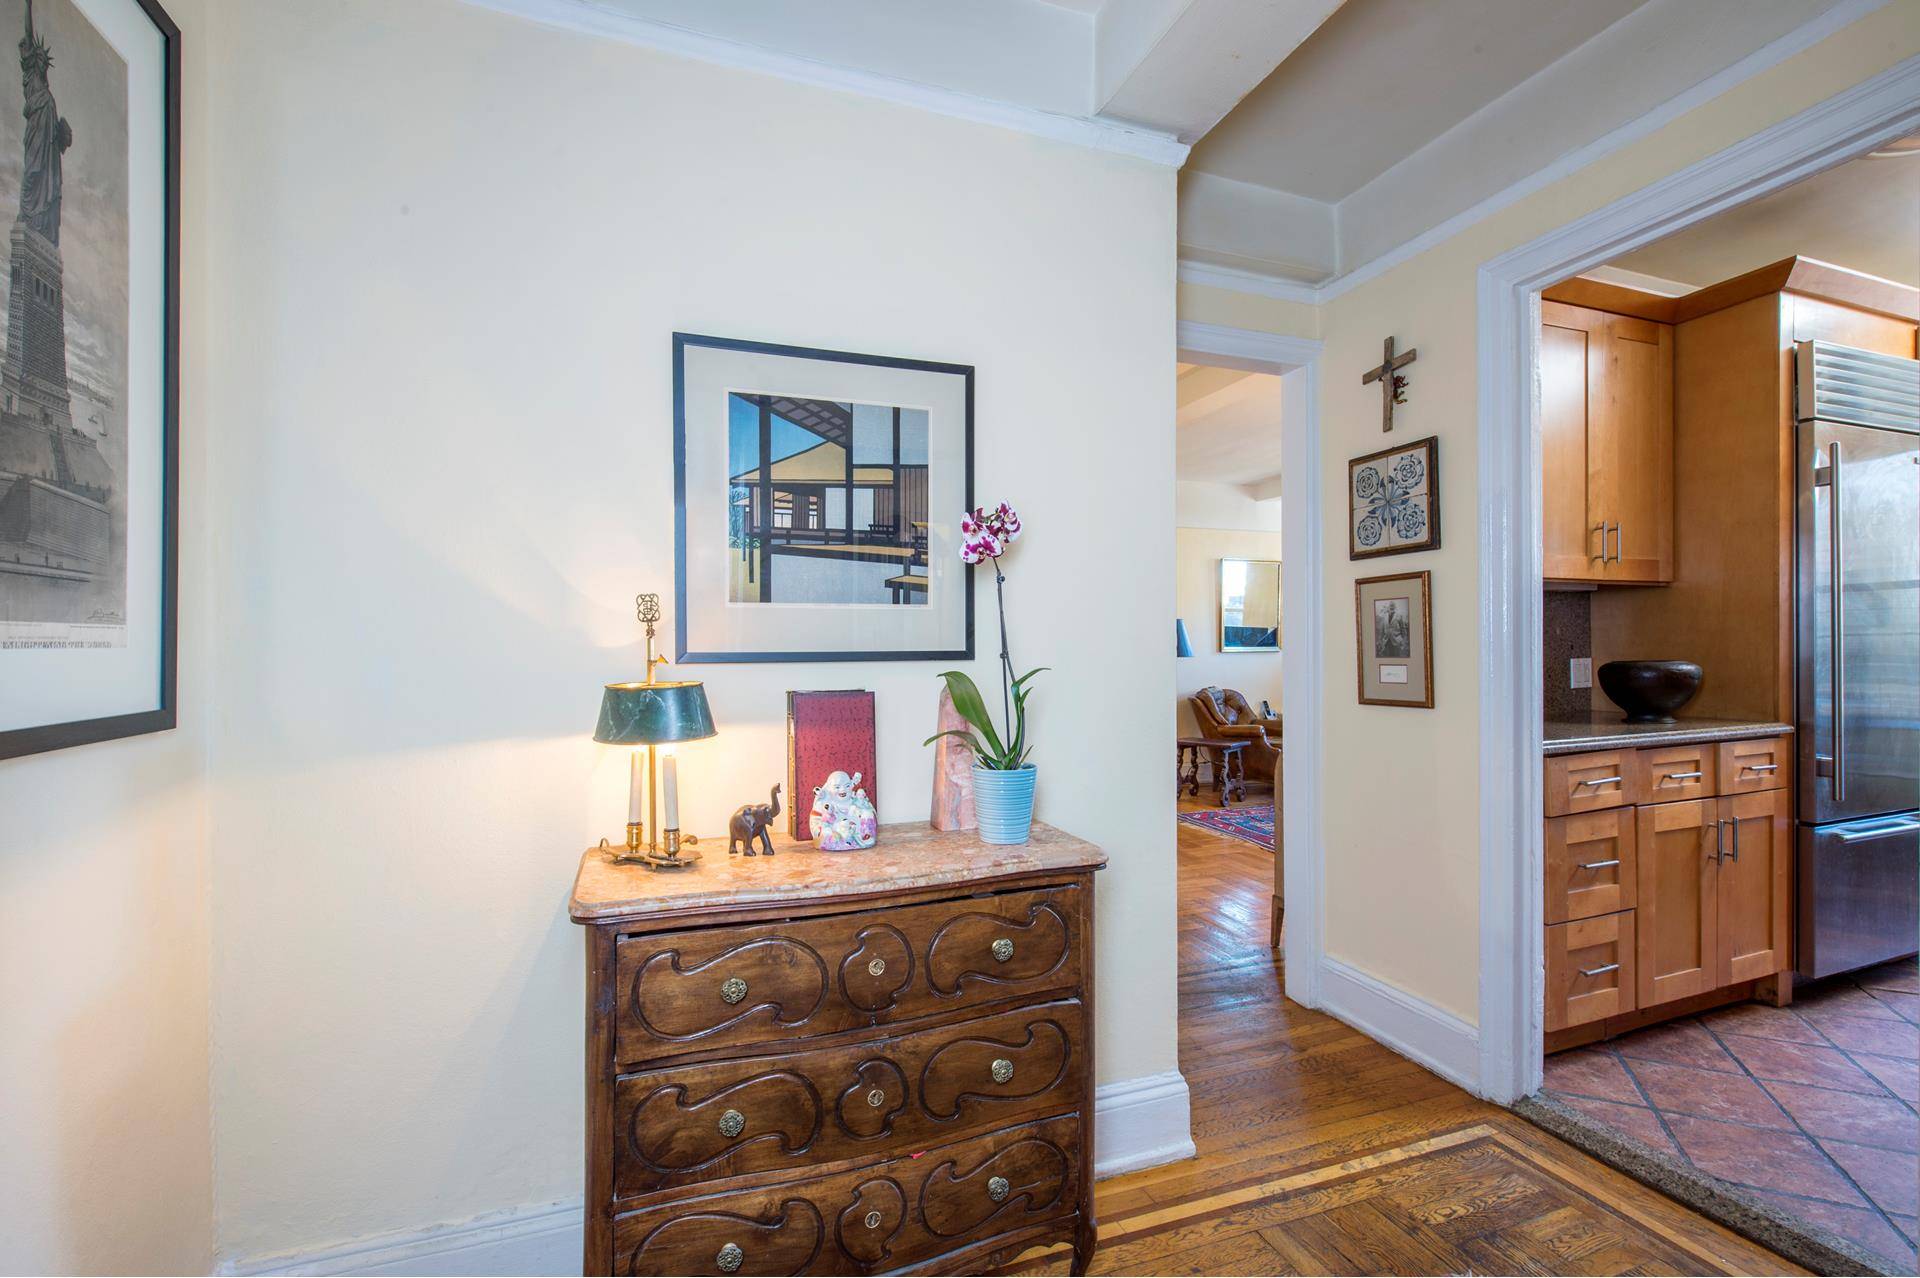 Come home to a gracious, traditional one bedroom, one bath cooperative home on Central Park West.